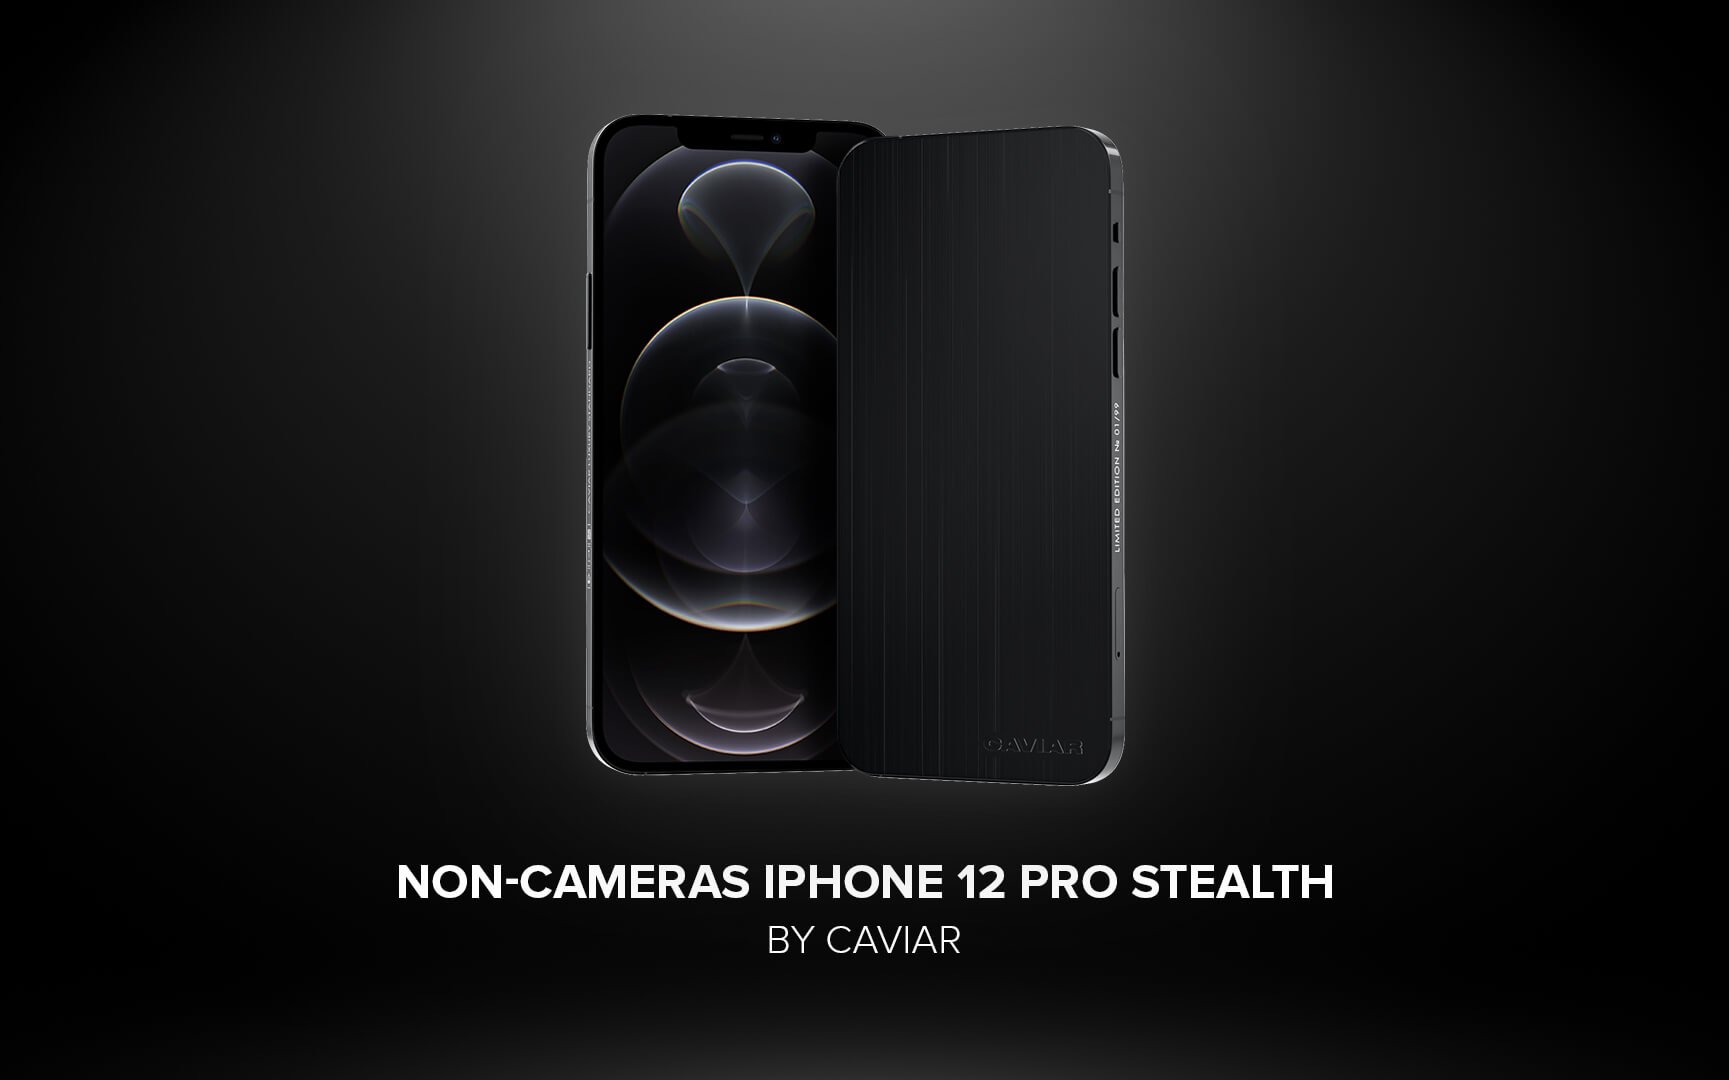 Caviar’s iPhone 12 Pro Stealth has no cameras for security reasons